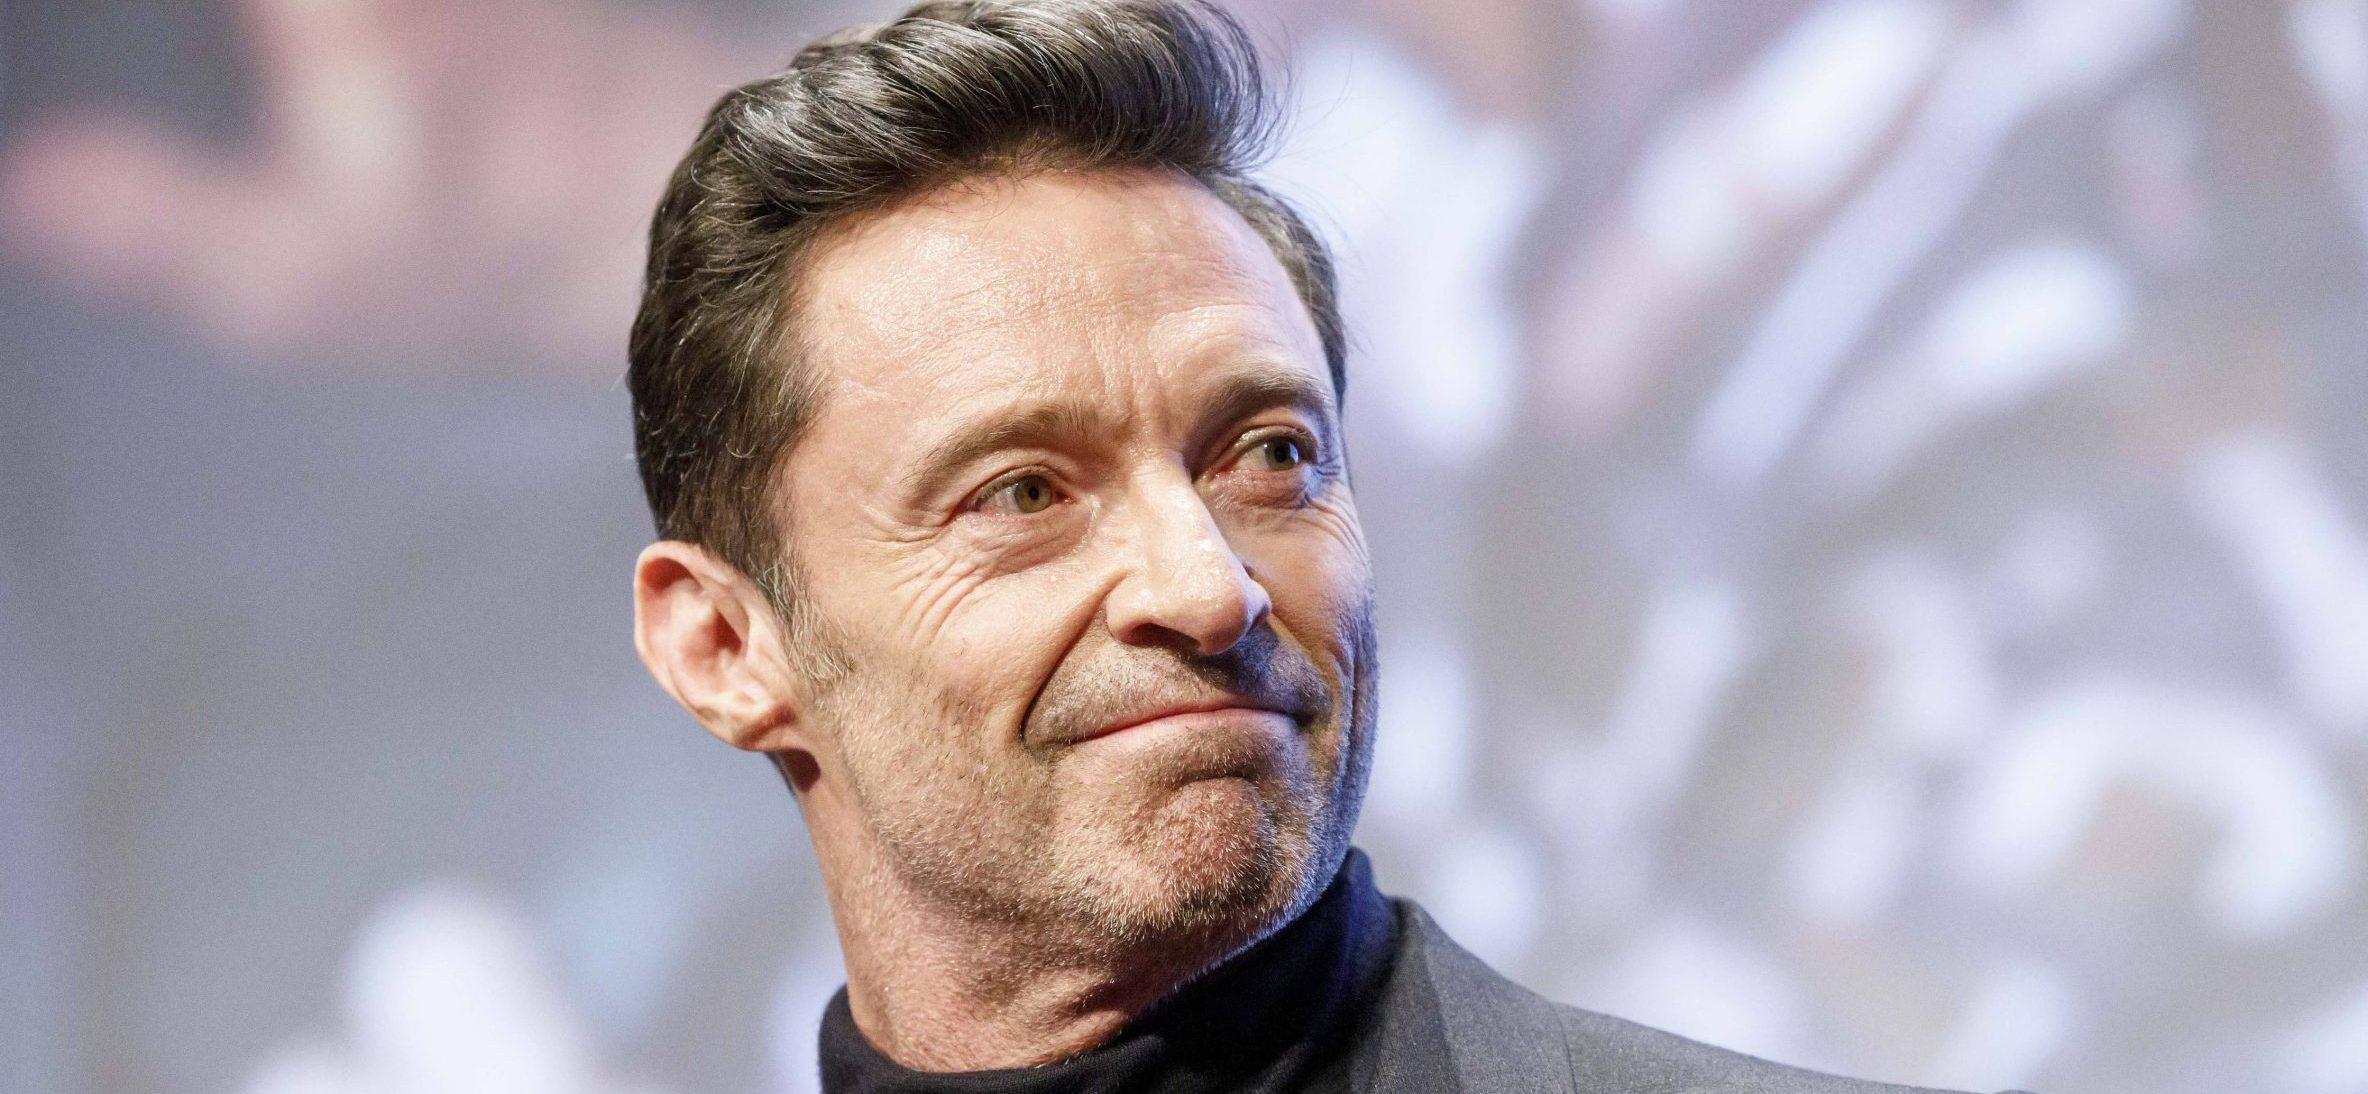 Hugh Jackman Advises Fans On Use Of Sunscreen After Possible Basal Cell Carcinoma Diagnosis